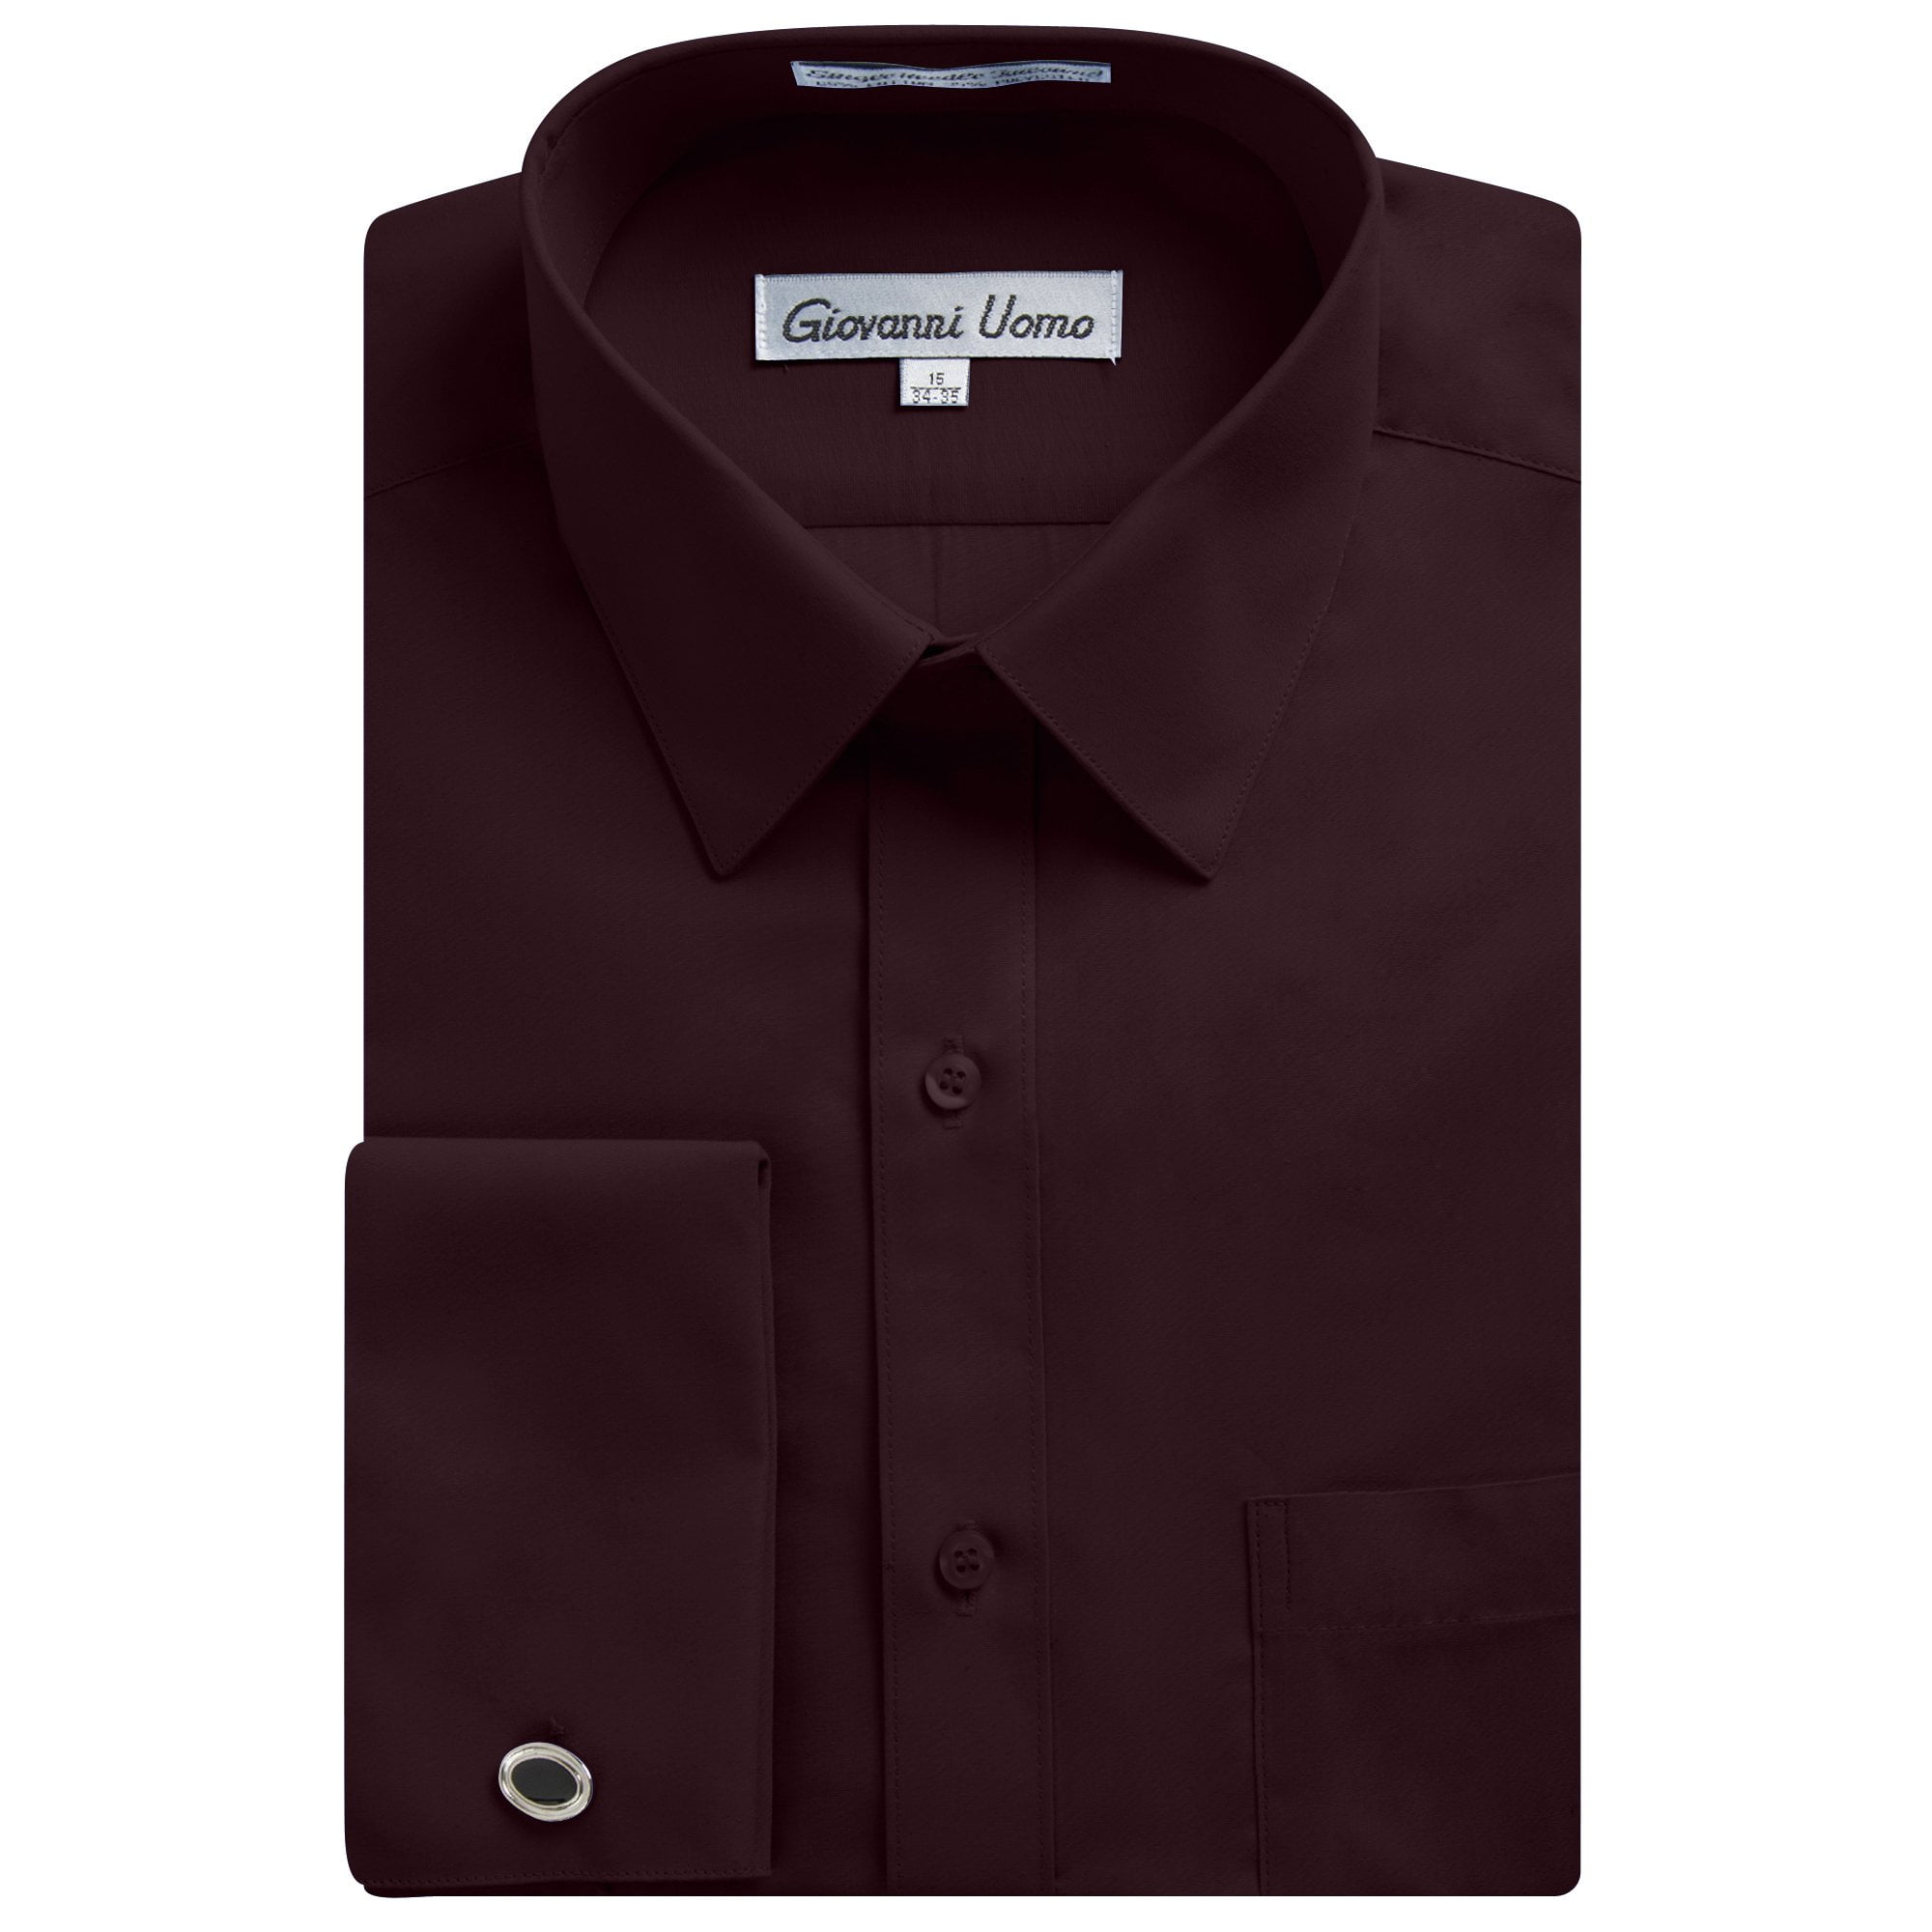 Gentlemens Collection Men's 1916FC French Cuff Solid Dress Shirt - Burgundy  - 18 2-3